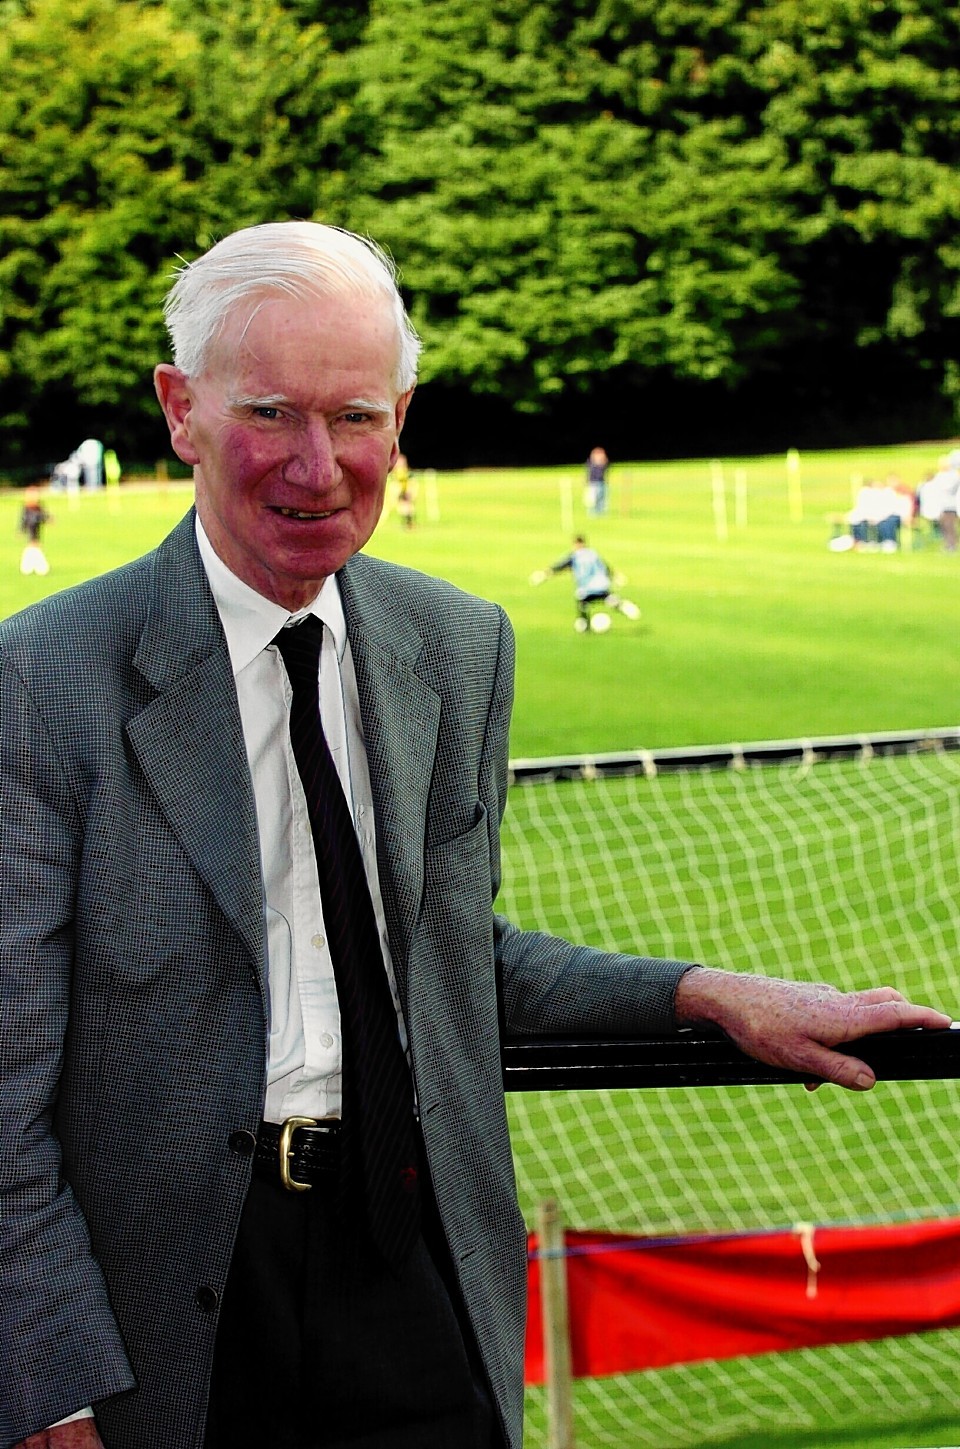 Mr Armstrong in 2004 during the AIFF at Seaton Park